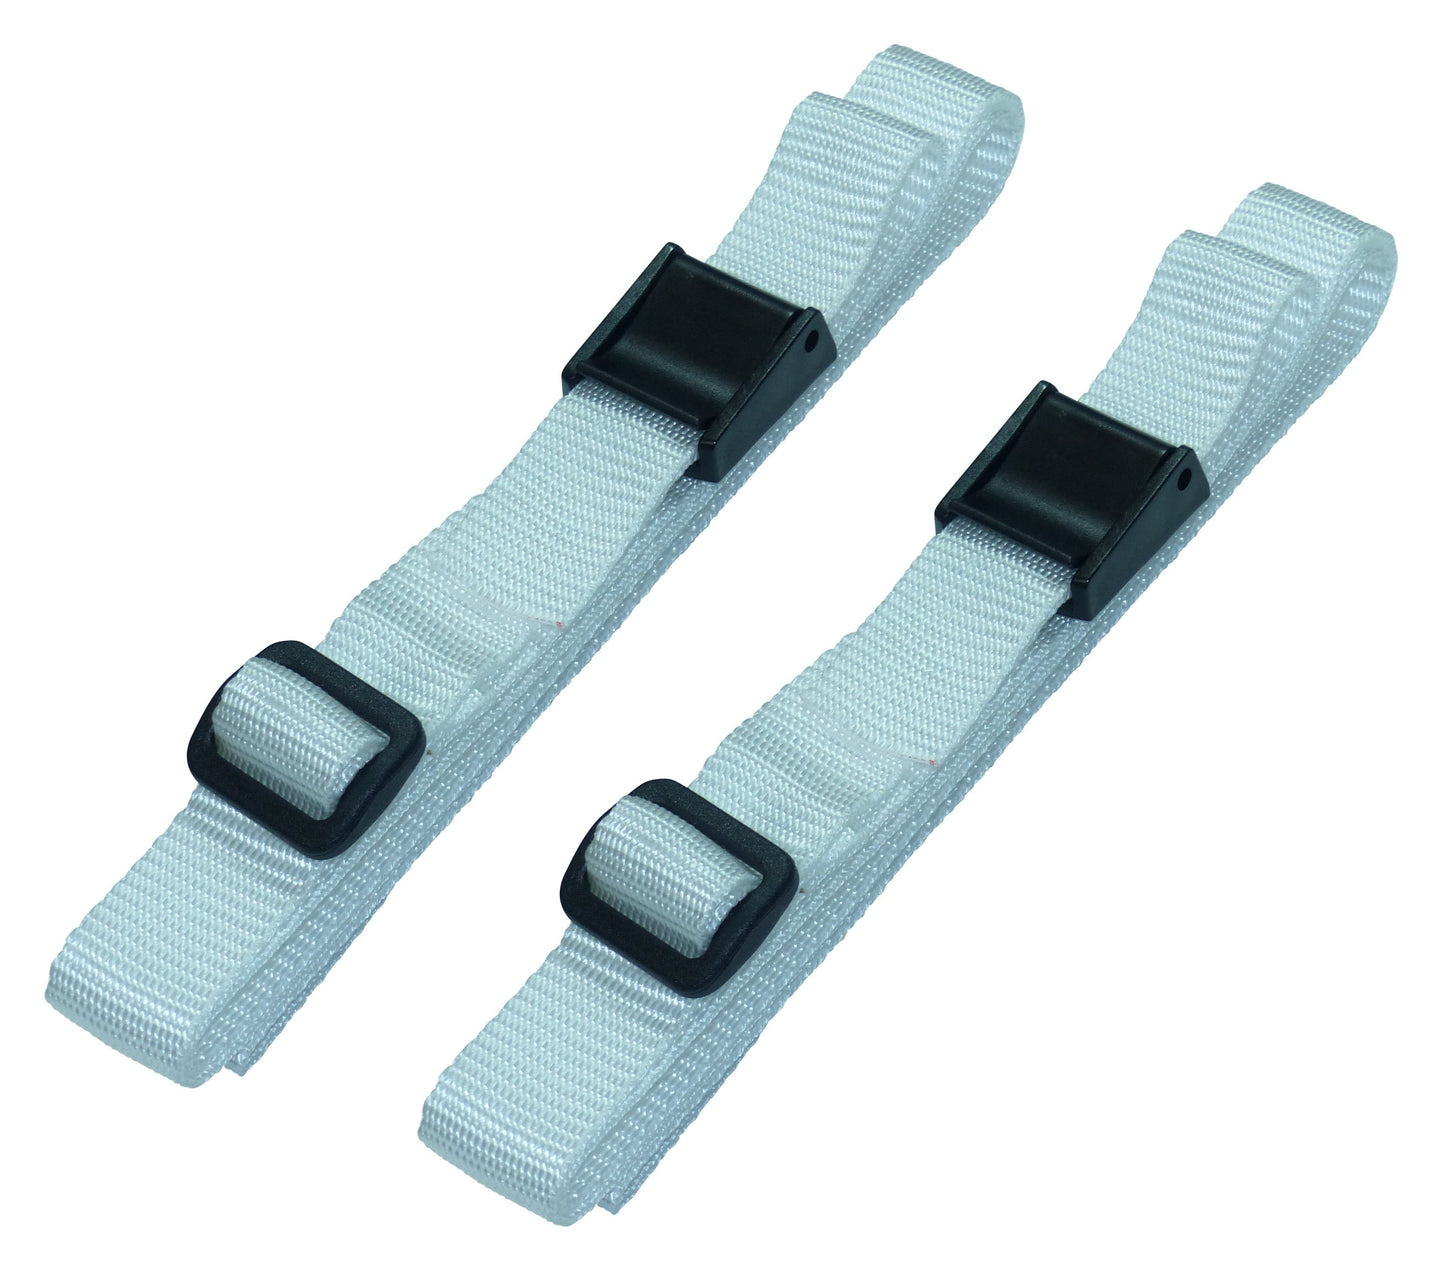 25mm Rivetted Strap with Plastic Cam Buckle & Triglide Buckles (Pair) in white